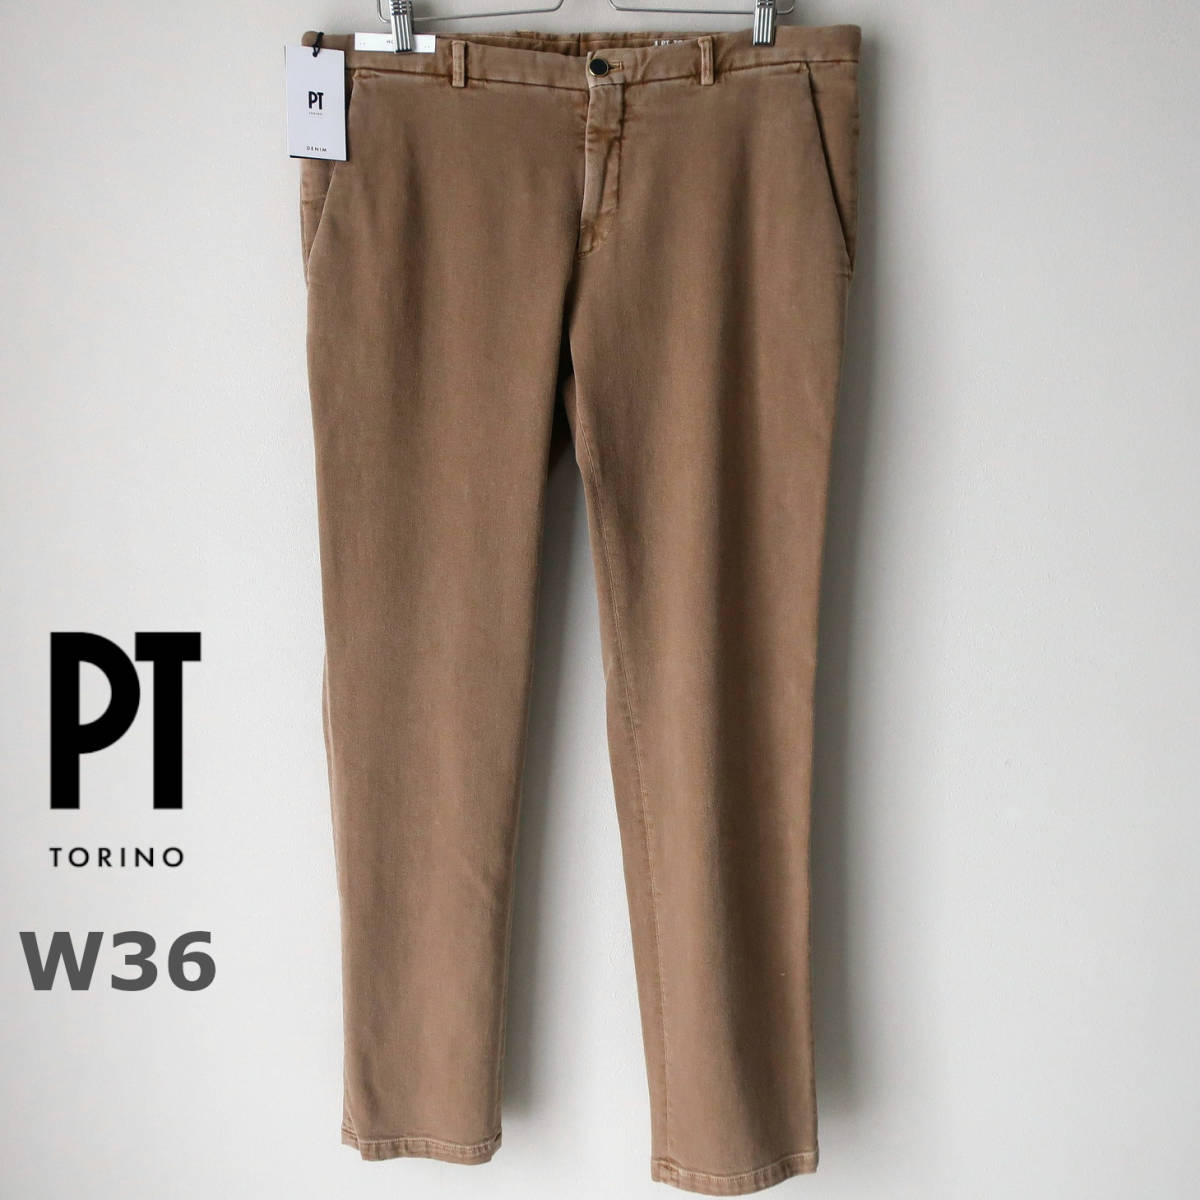  new goods PT TORINO fine quality. wash feeling stretch tapered pants chinos beautiful legs thin PT01 PT05 Brown tea color beige men's W36 XXL 2XL